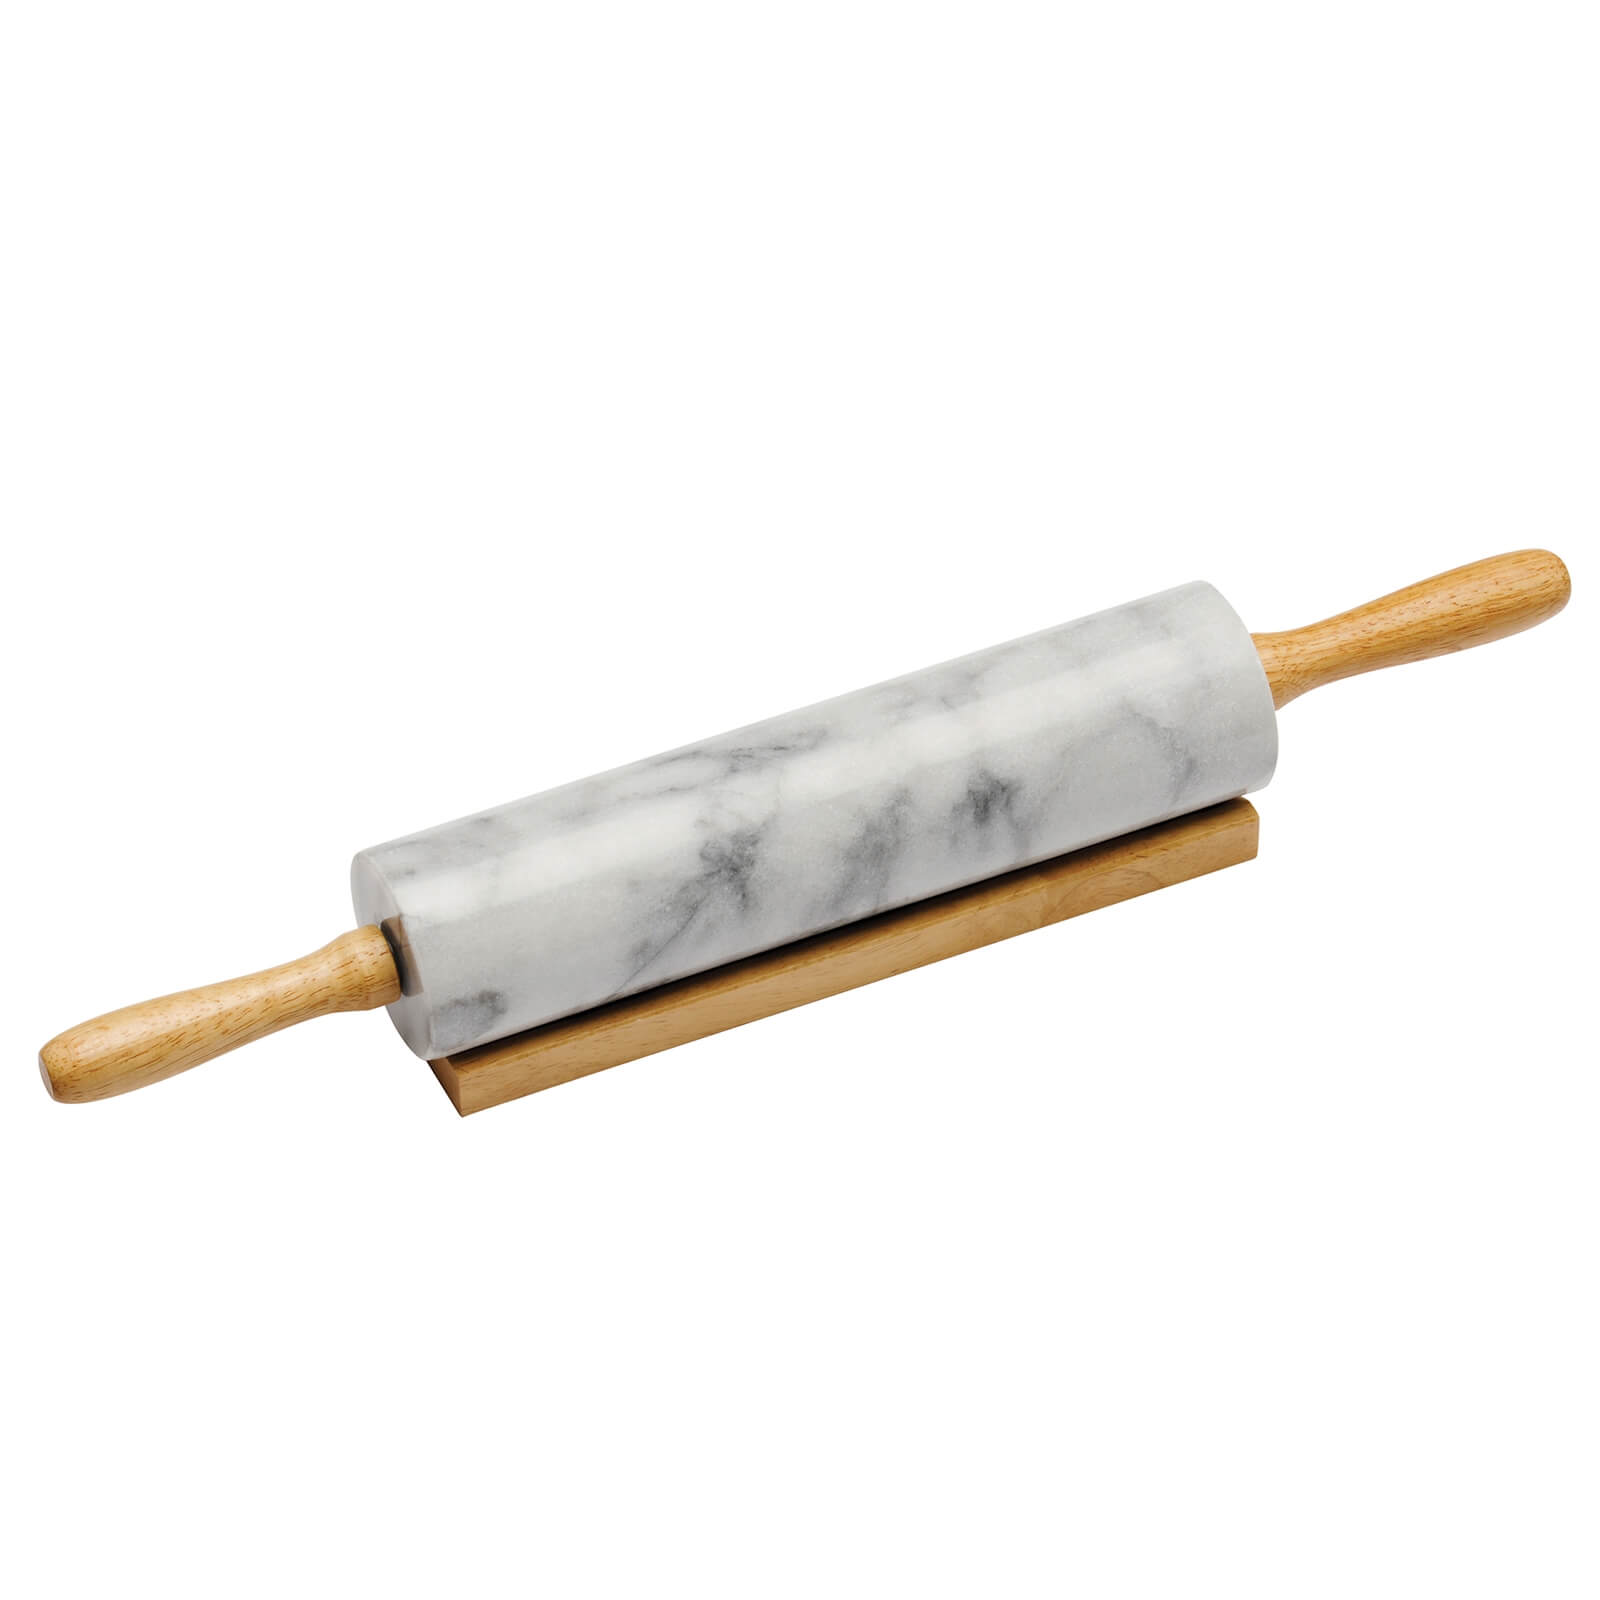 White Marble Rolling Pin